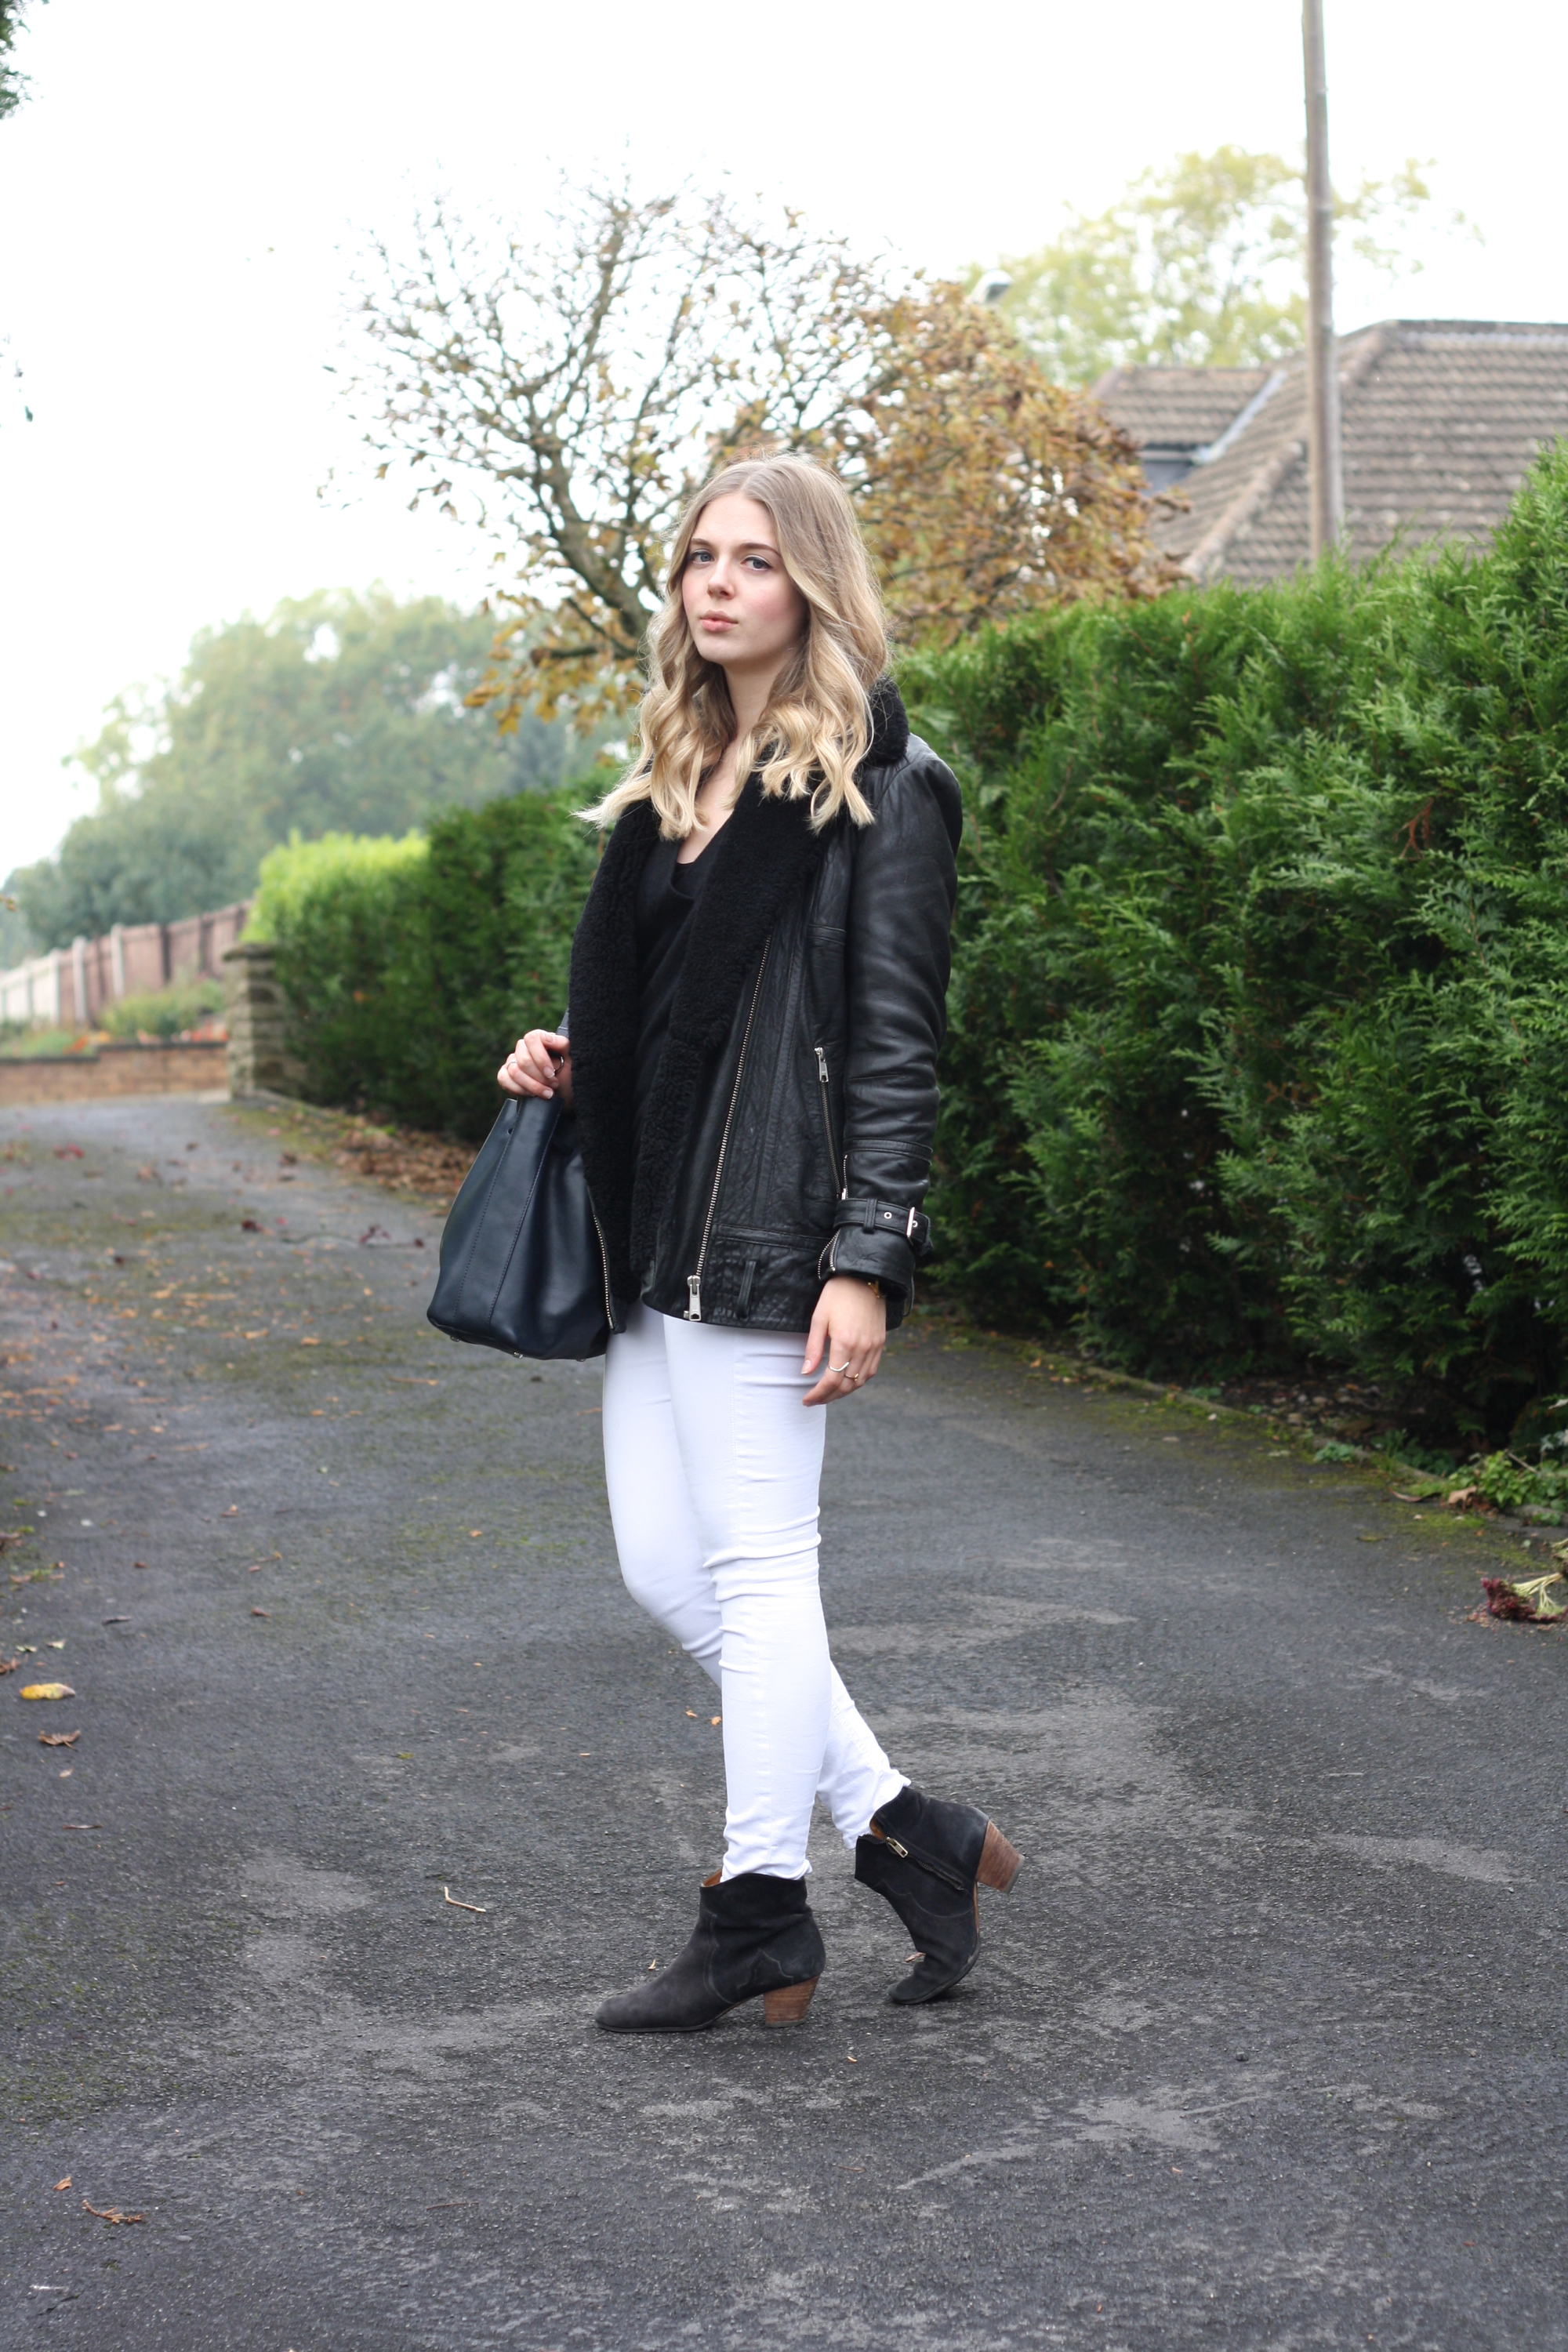 Whistles sheepskin leather jacket, Isabel Marant black ankle boots and Topshop Jamie jeans